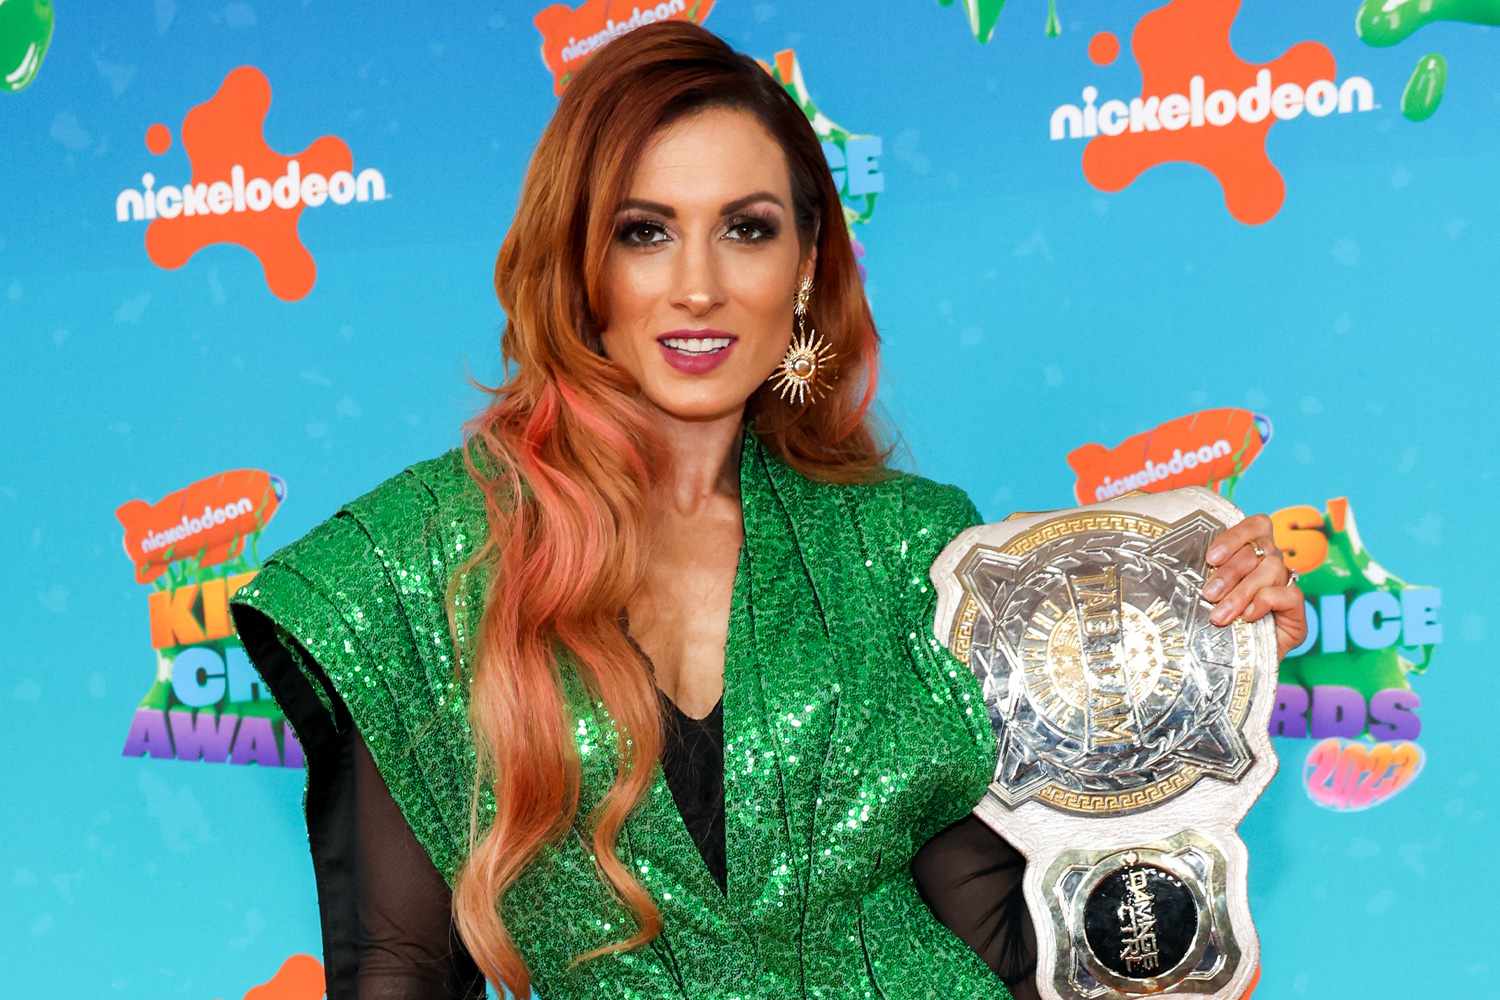 doug gordy recommends becky lynch boob pic